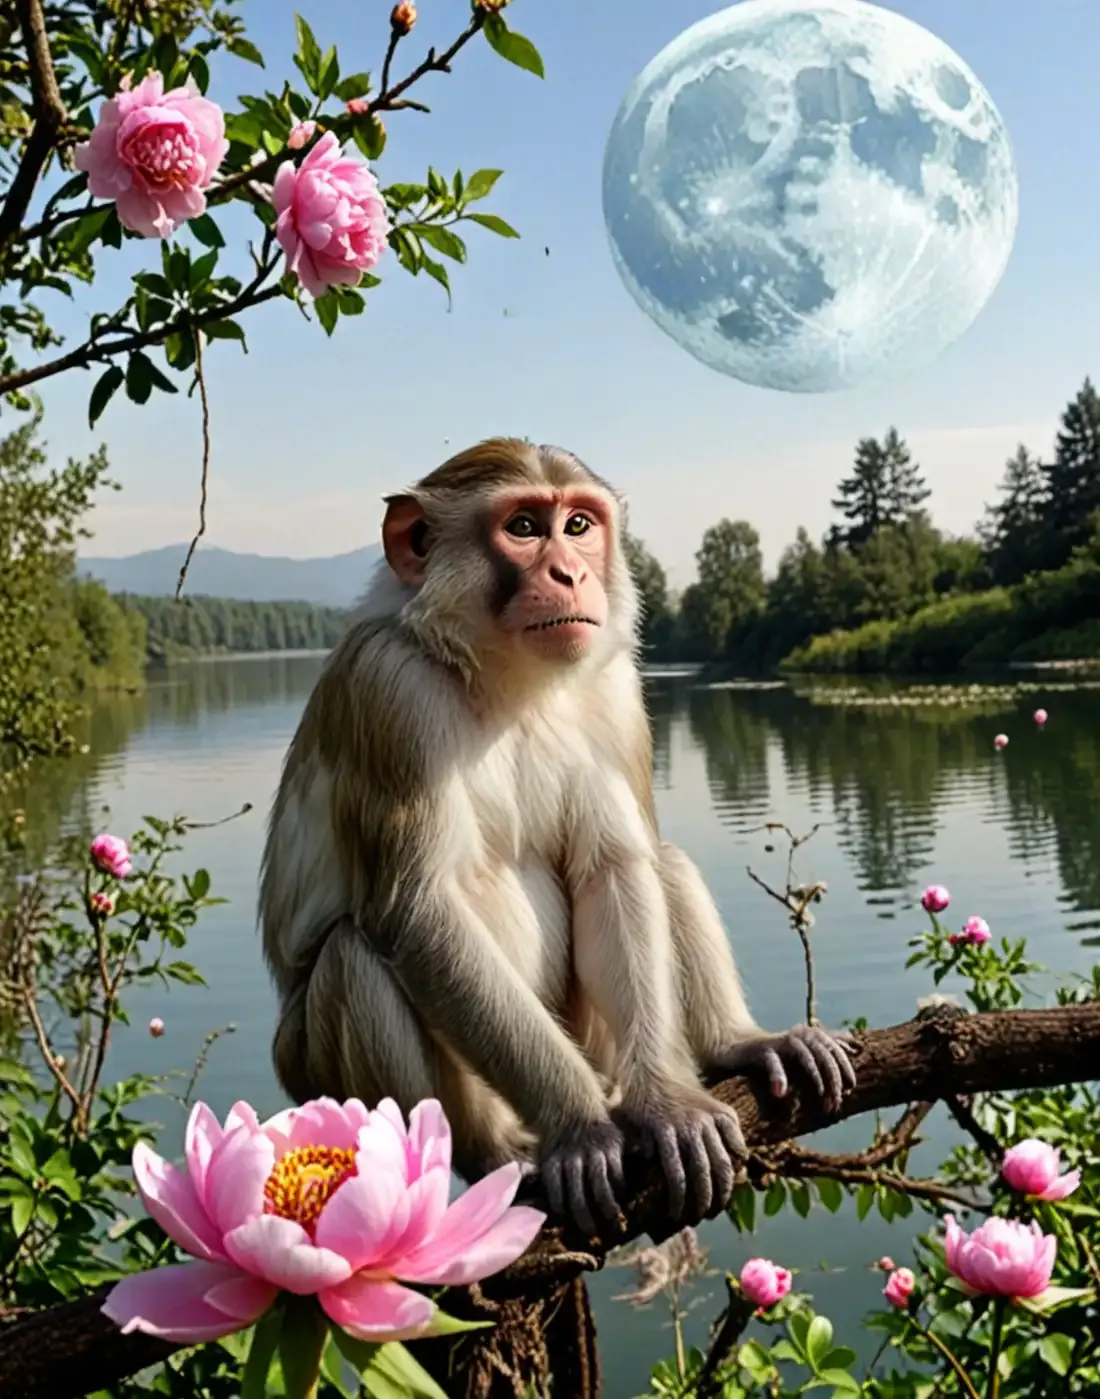 fake photograph of a monkey on a tree branch, in front of a lake, surrounded by pink flowers. huge moon in the background